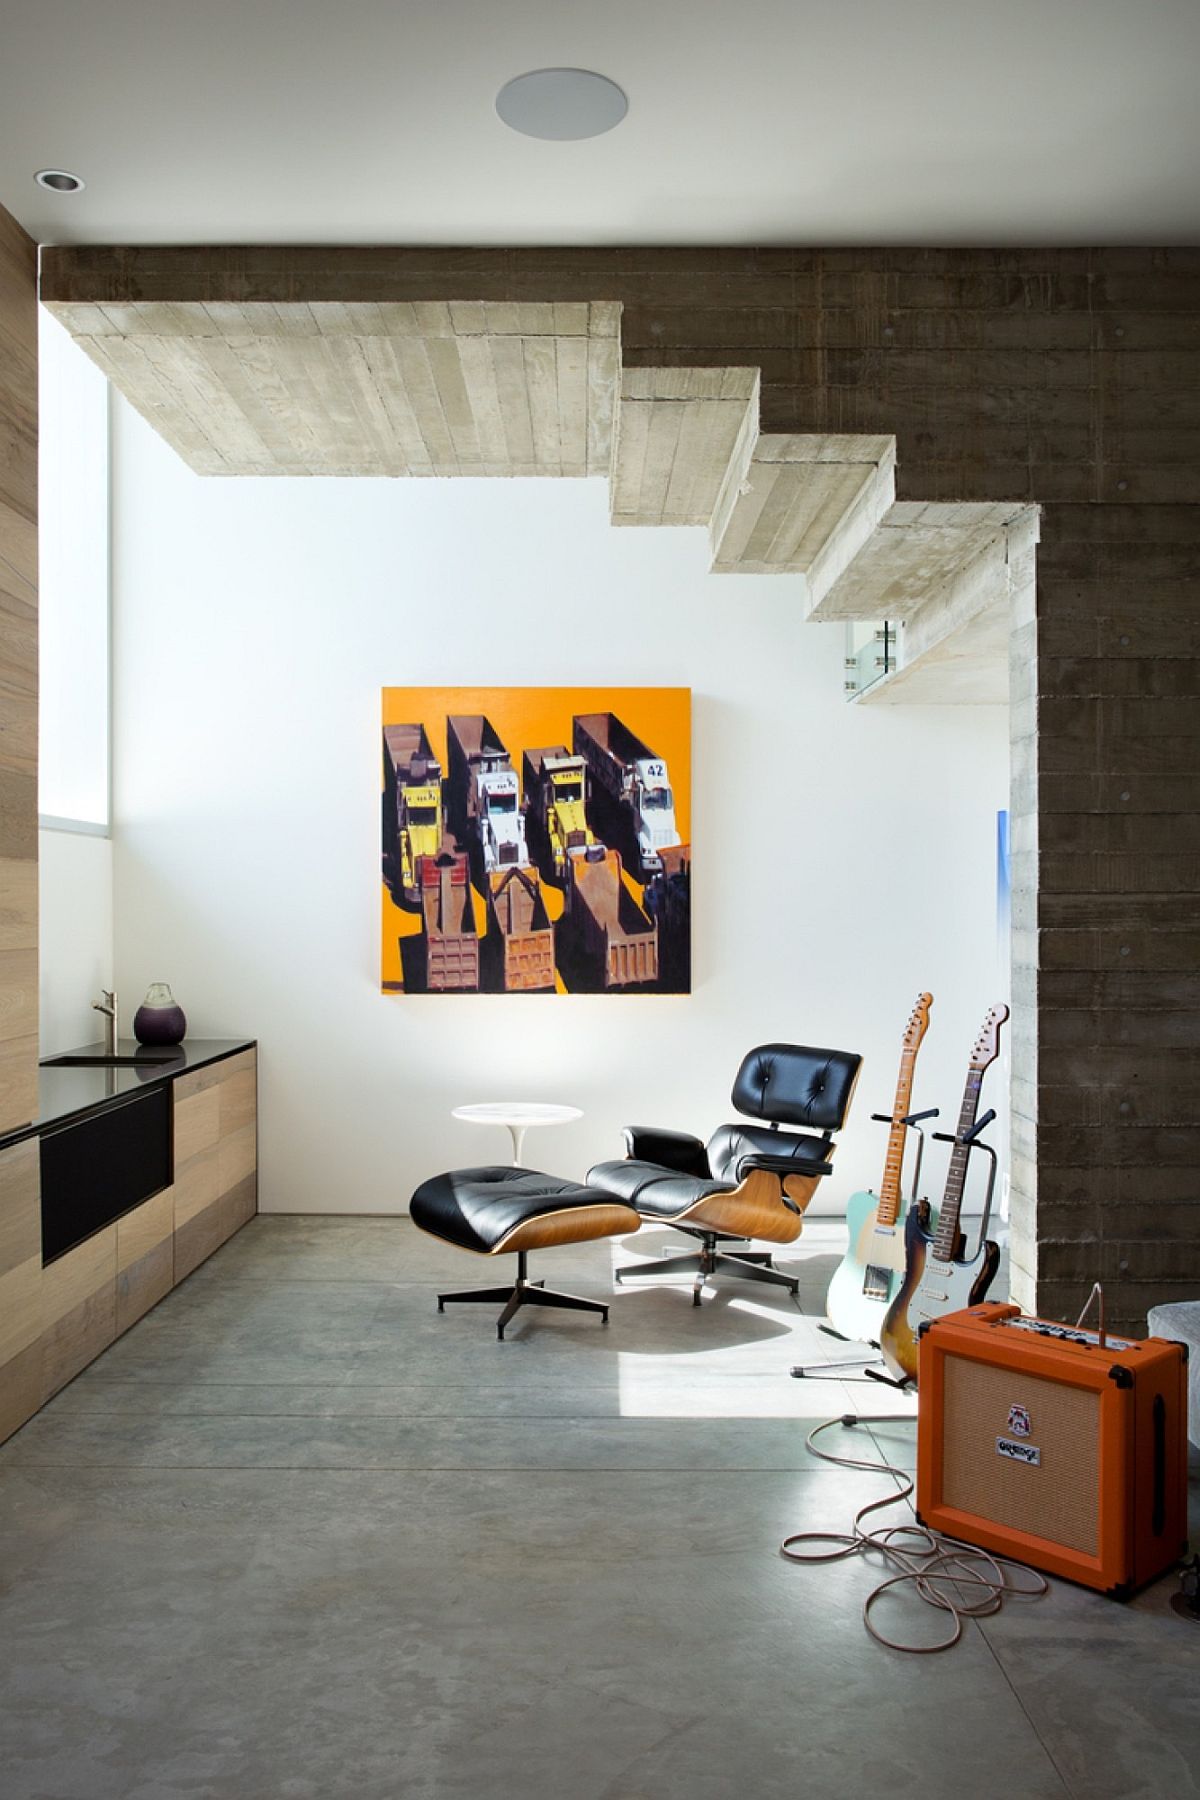 Small-recreational-and-relaxation-space-under-the-stairway-with-the-Eames-Lounger